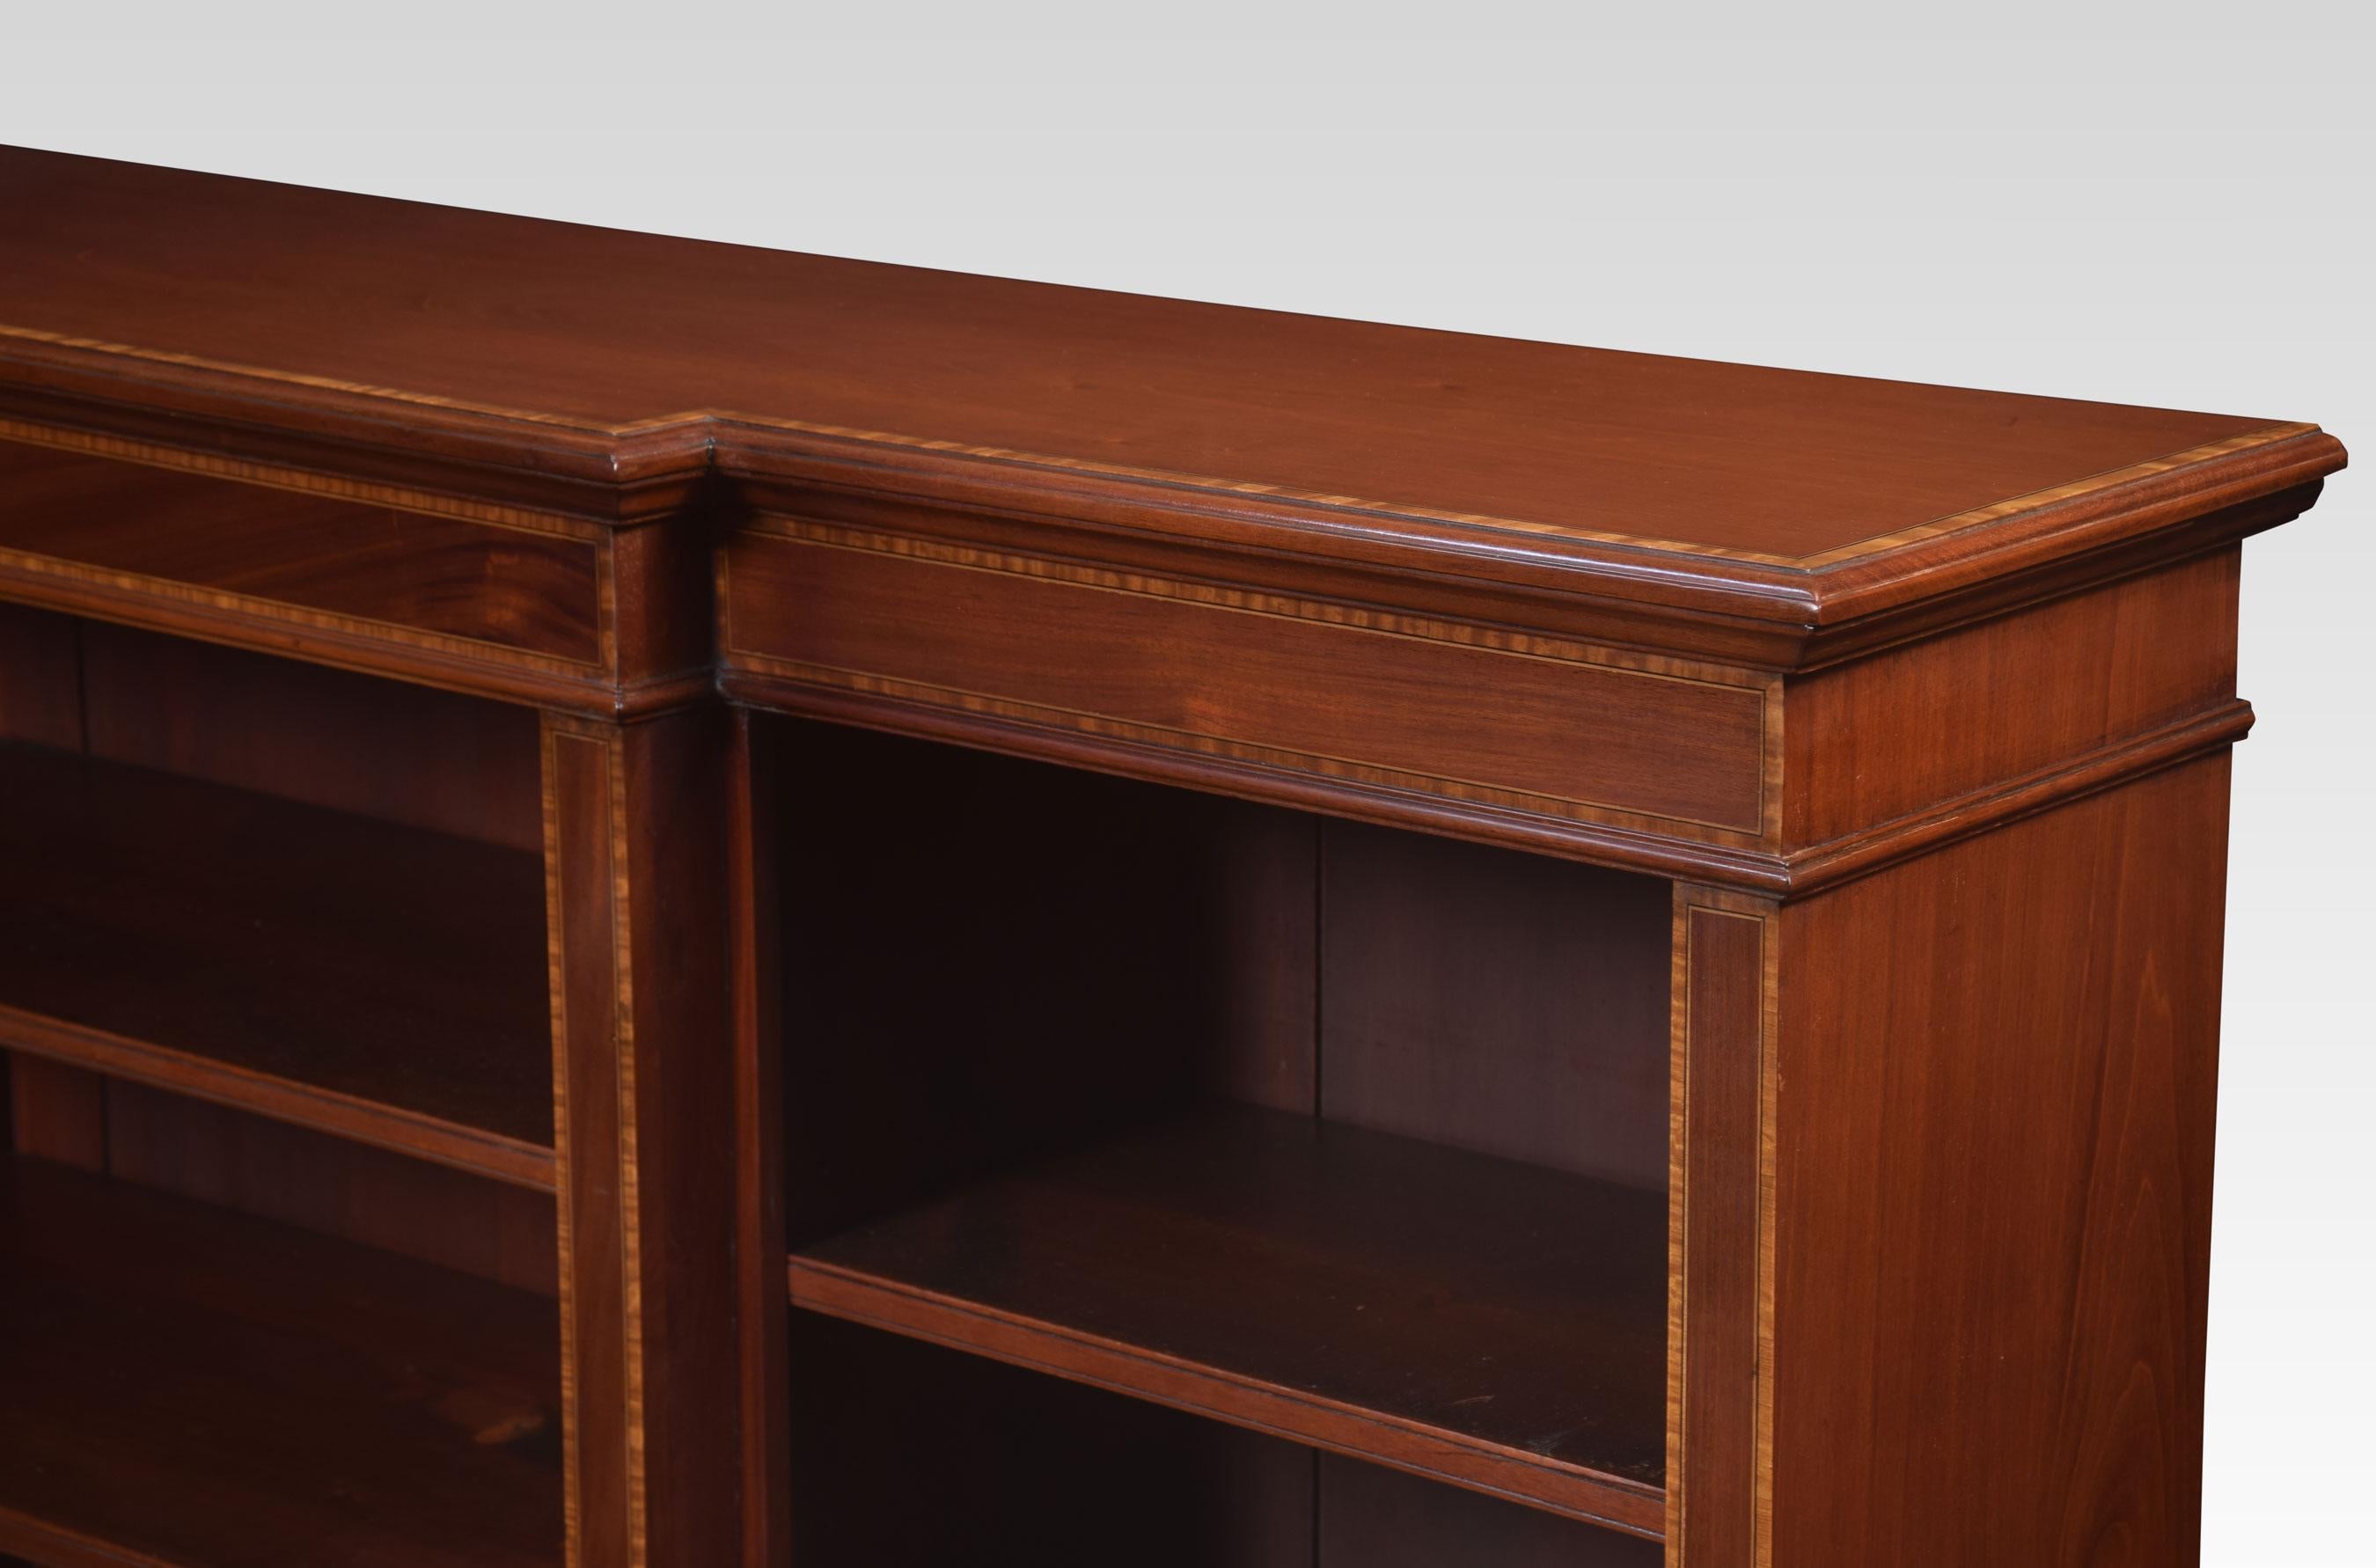 Mahogany bookcase, the rectangular breakfront top with satinwood inlaid border. Above three bays of adjustable shelves, all raised up on plinth base.
Dimensions:
Height 48 inches
Width 72 inches
Depth 15.5 inches.